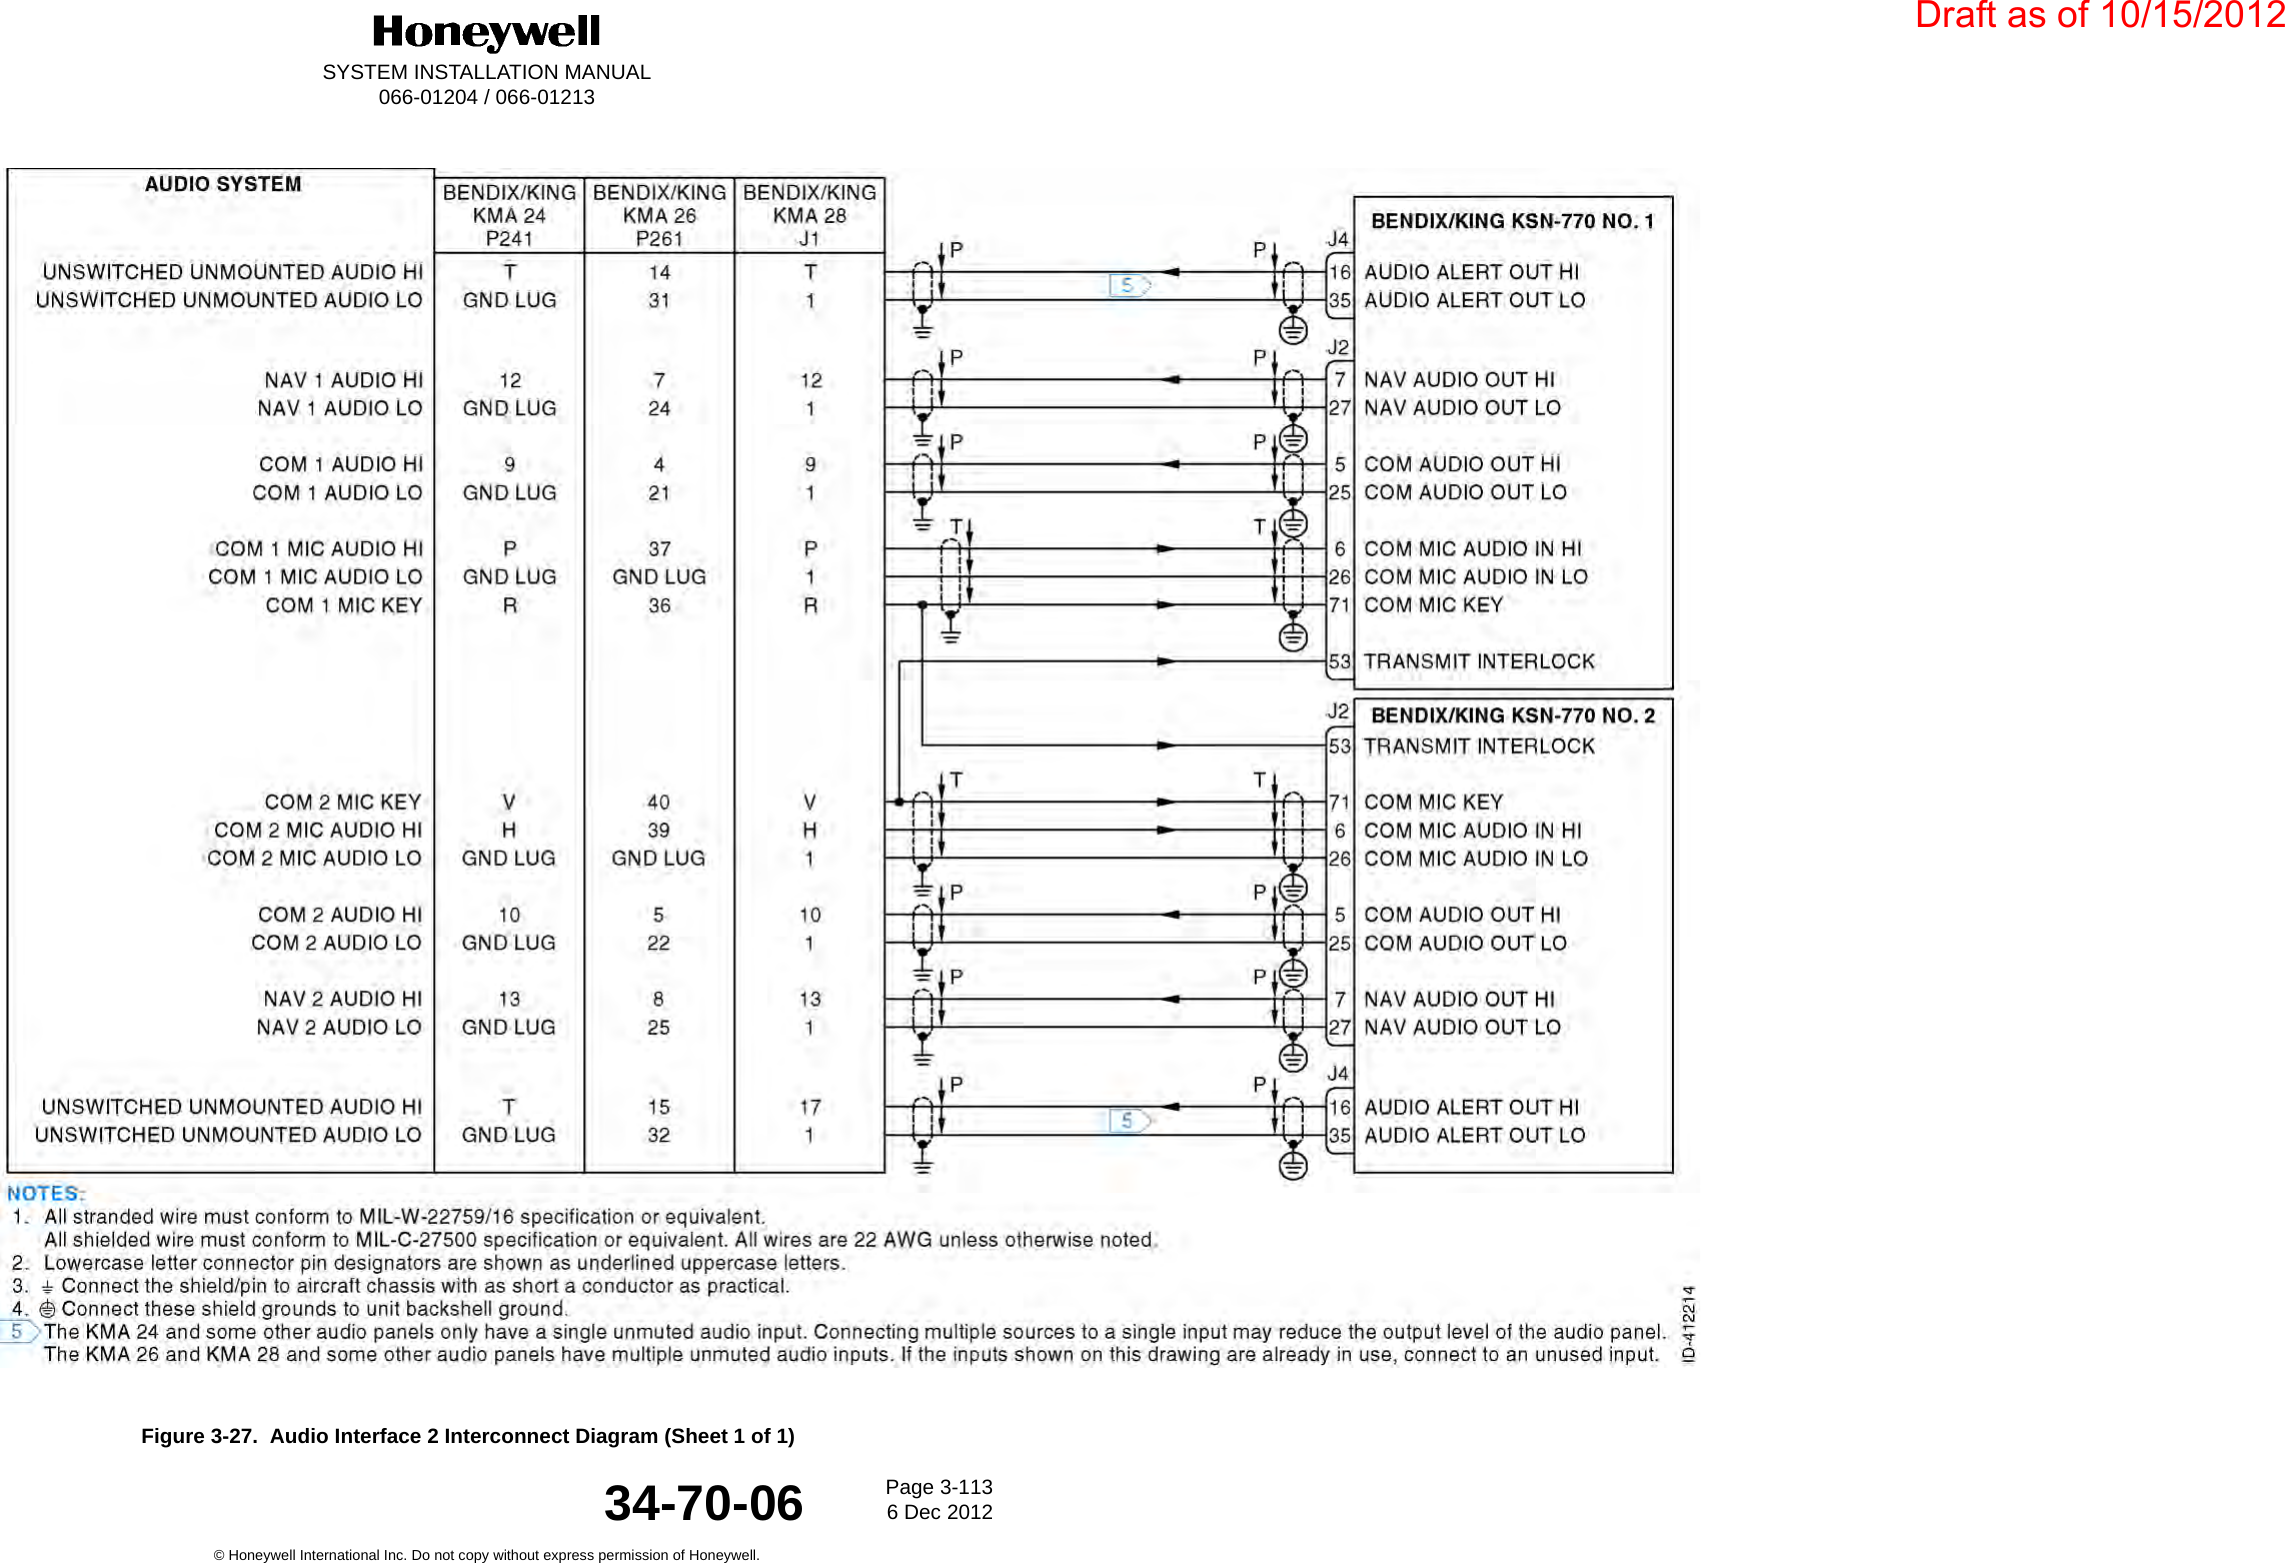 DraftSYSTEM INSTALLATION MANUAL066-01204 / 066-01213Page 3-1136 Dec 2012© Honeywell International Inc. Do not copy without express permission of Honeywell.34-70-06Figure 3-27.  Audio Interface 2 Interconnect Diagram (Sheet 1 of 1)Draft as of 10/15/2012